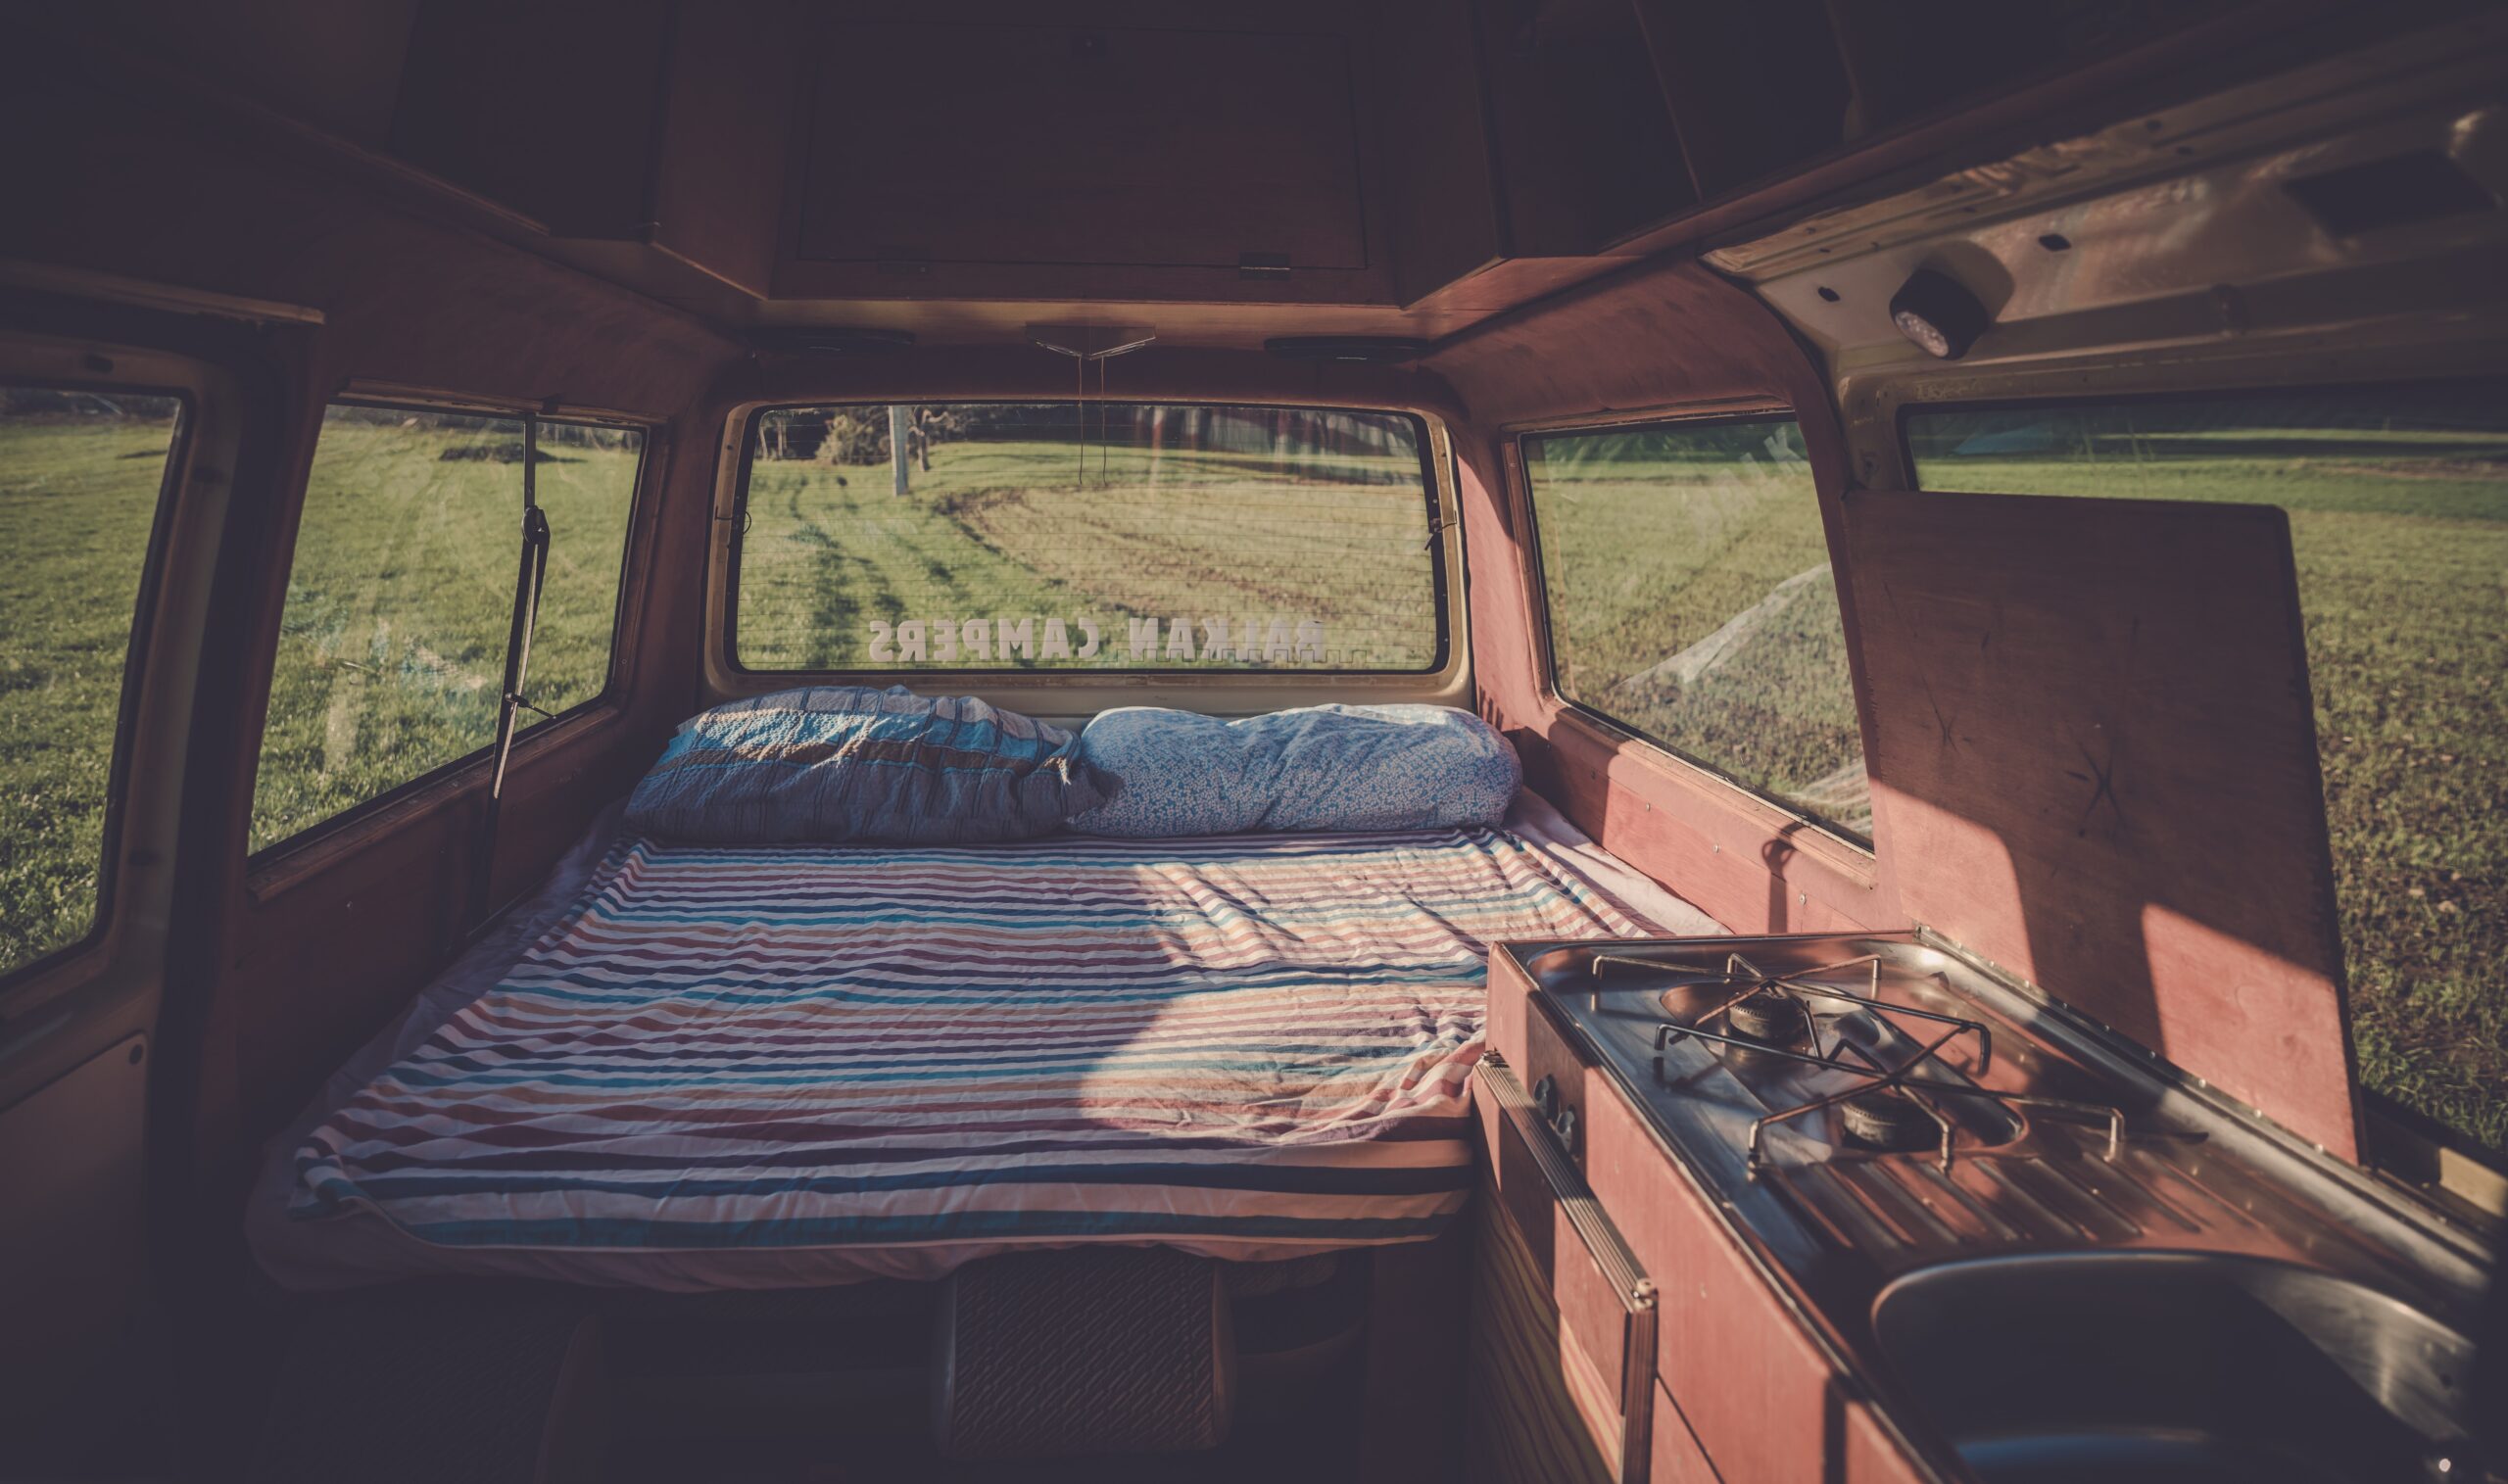 What You Must Know Before Purchasing a Camper Van